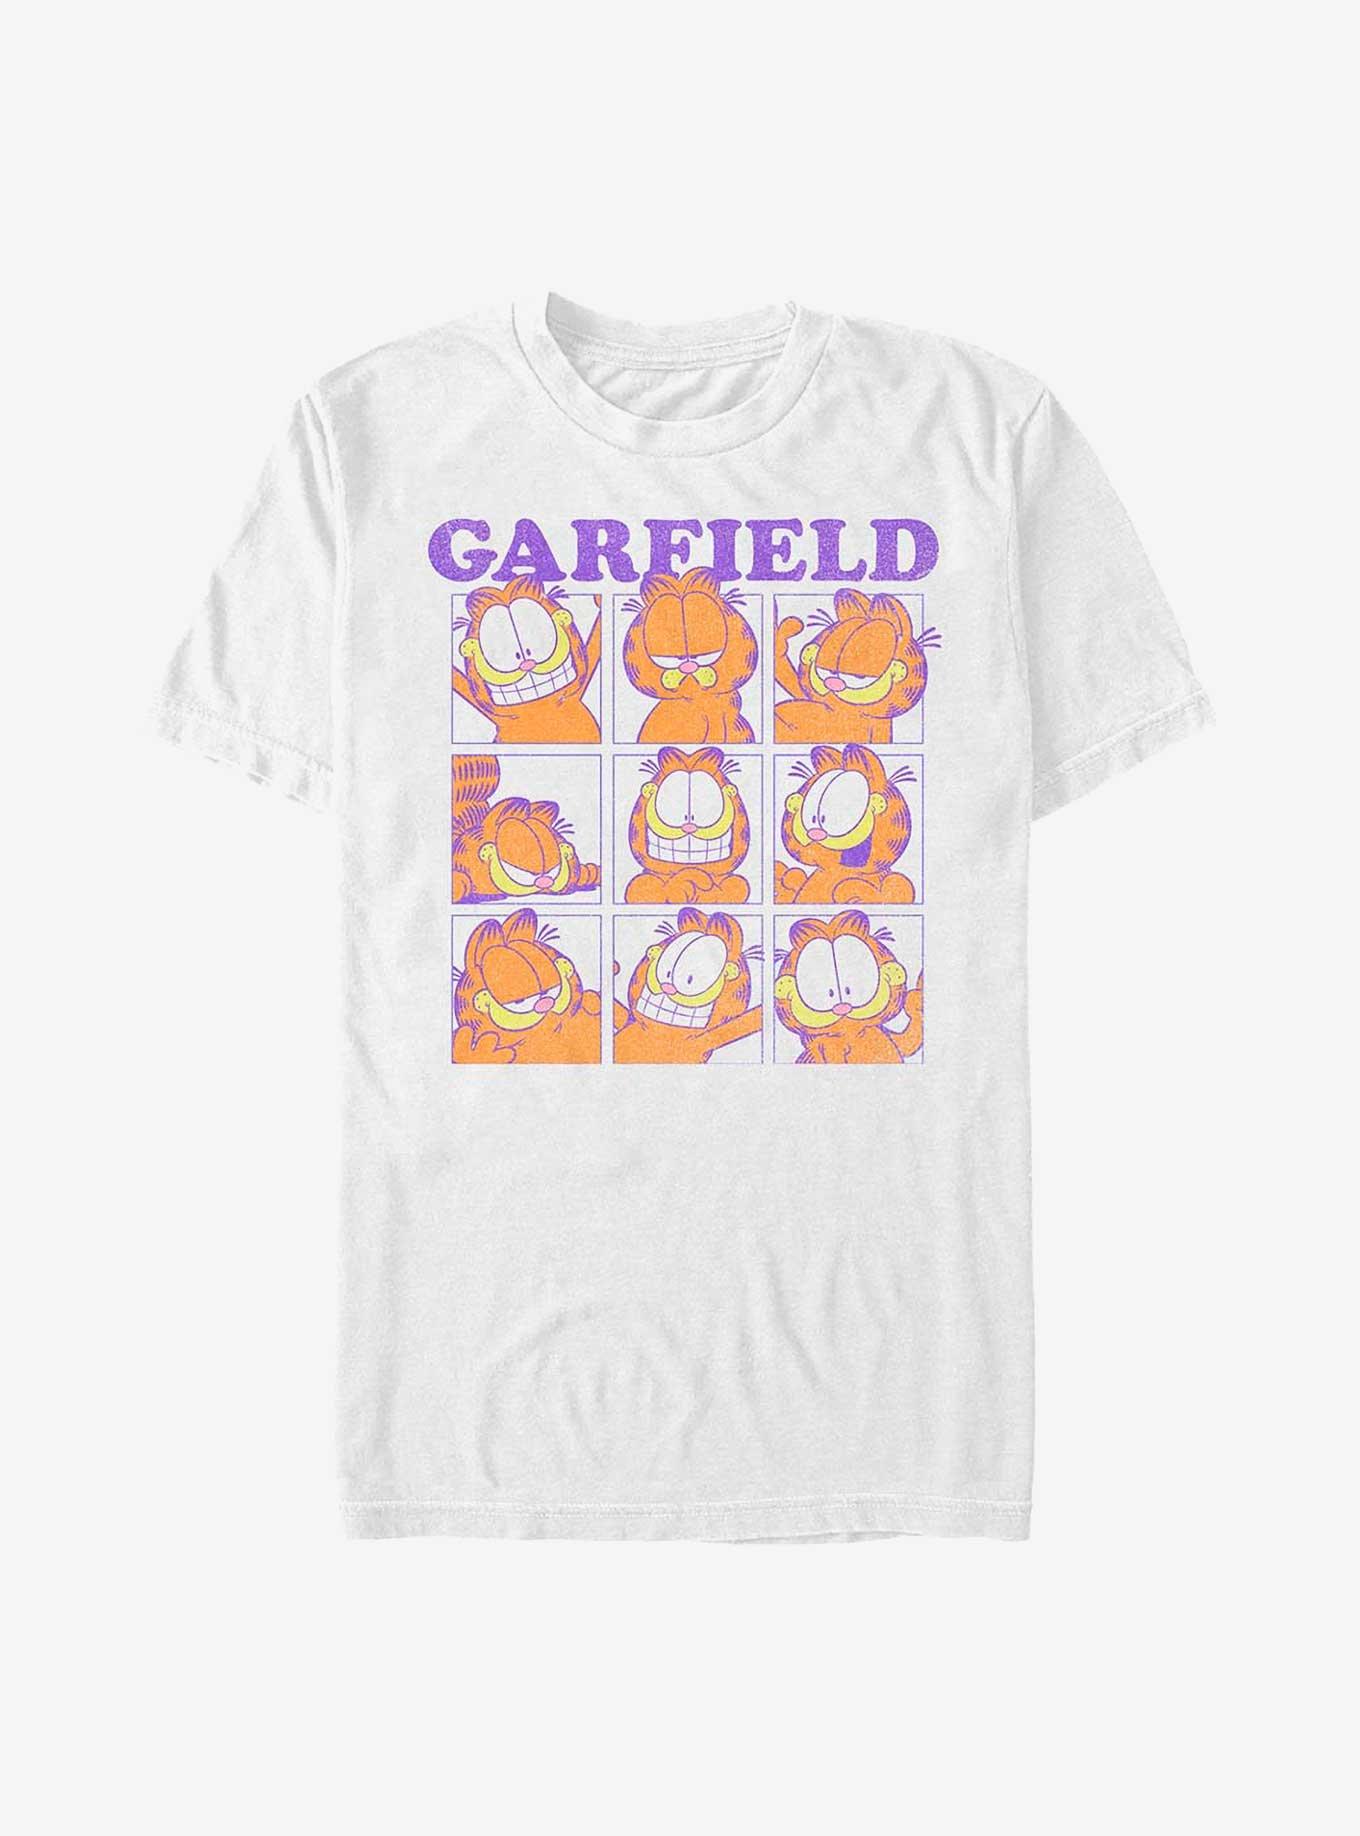 Garfield Many Faces of Garfield T-Shirt, WHITE, hi-res